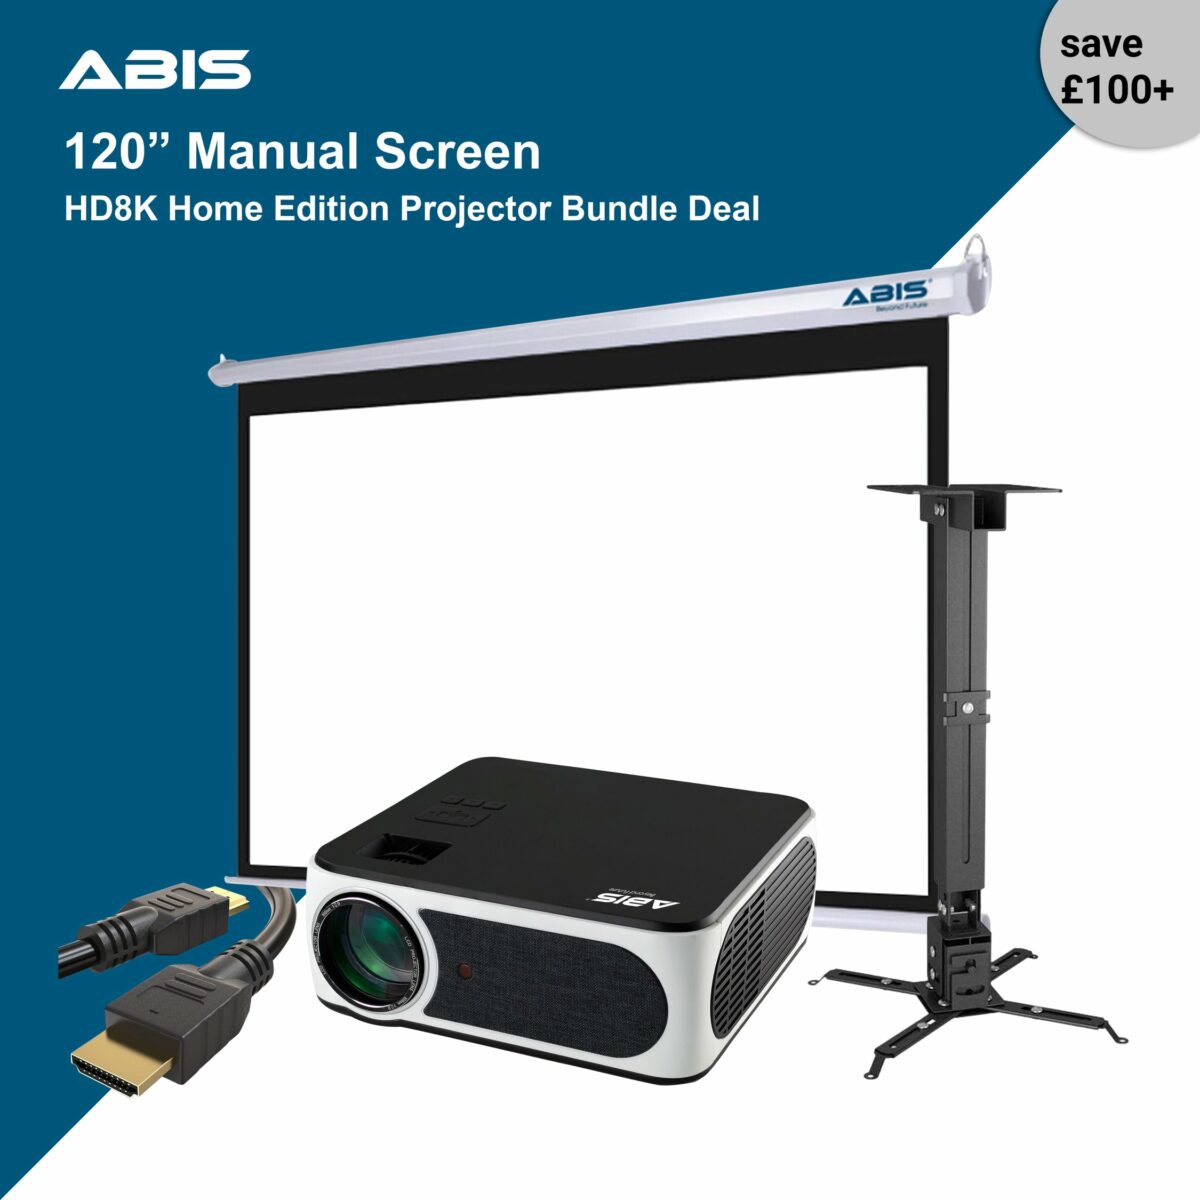 120" Manual Projector Screen & Projector Bundle with Android TV Stick for Home - Complete Set - ABIS